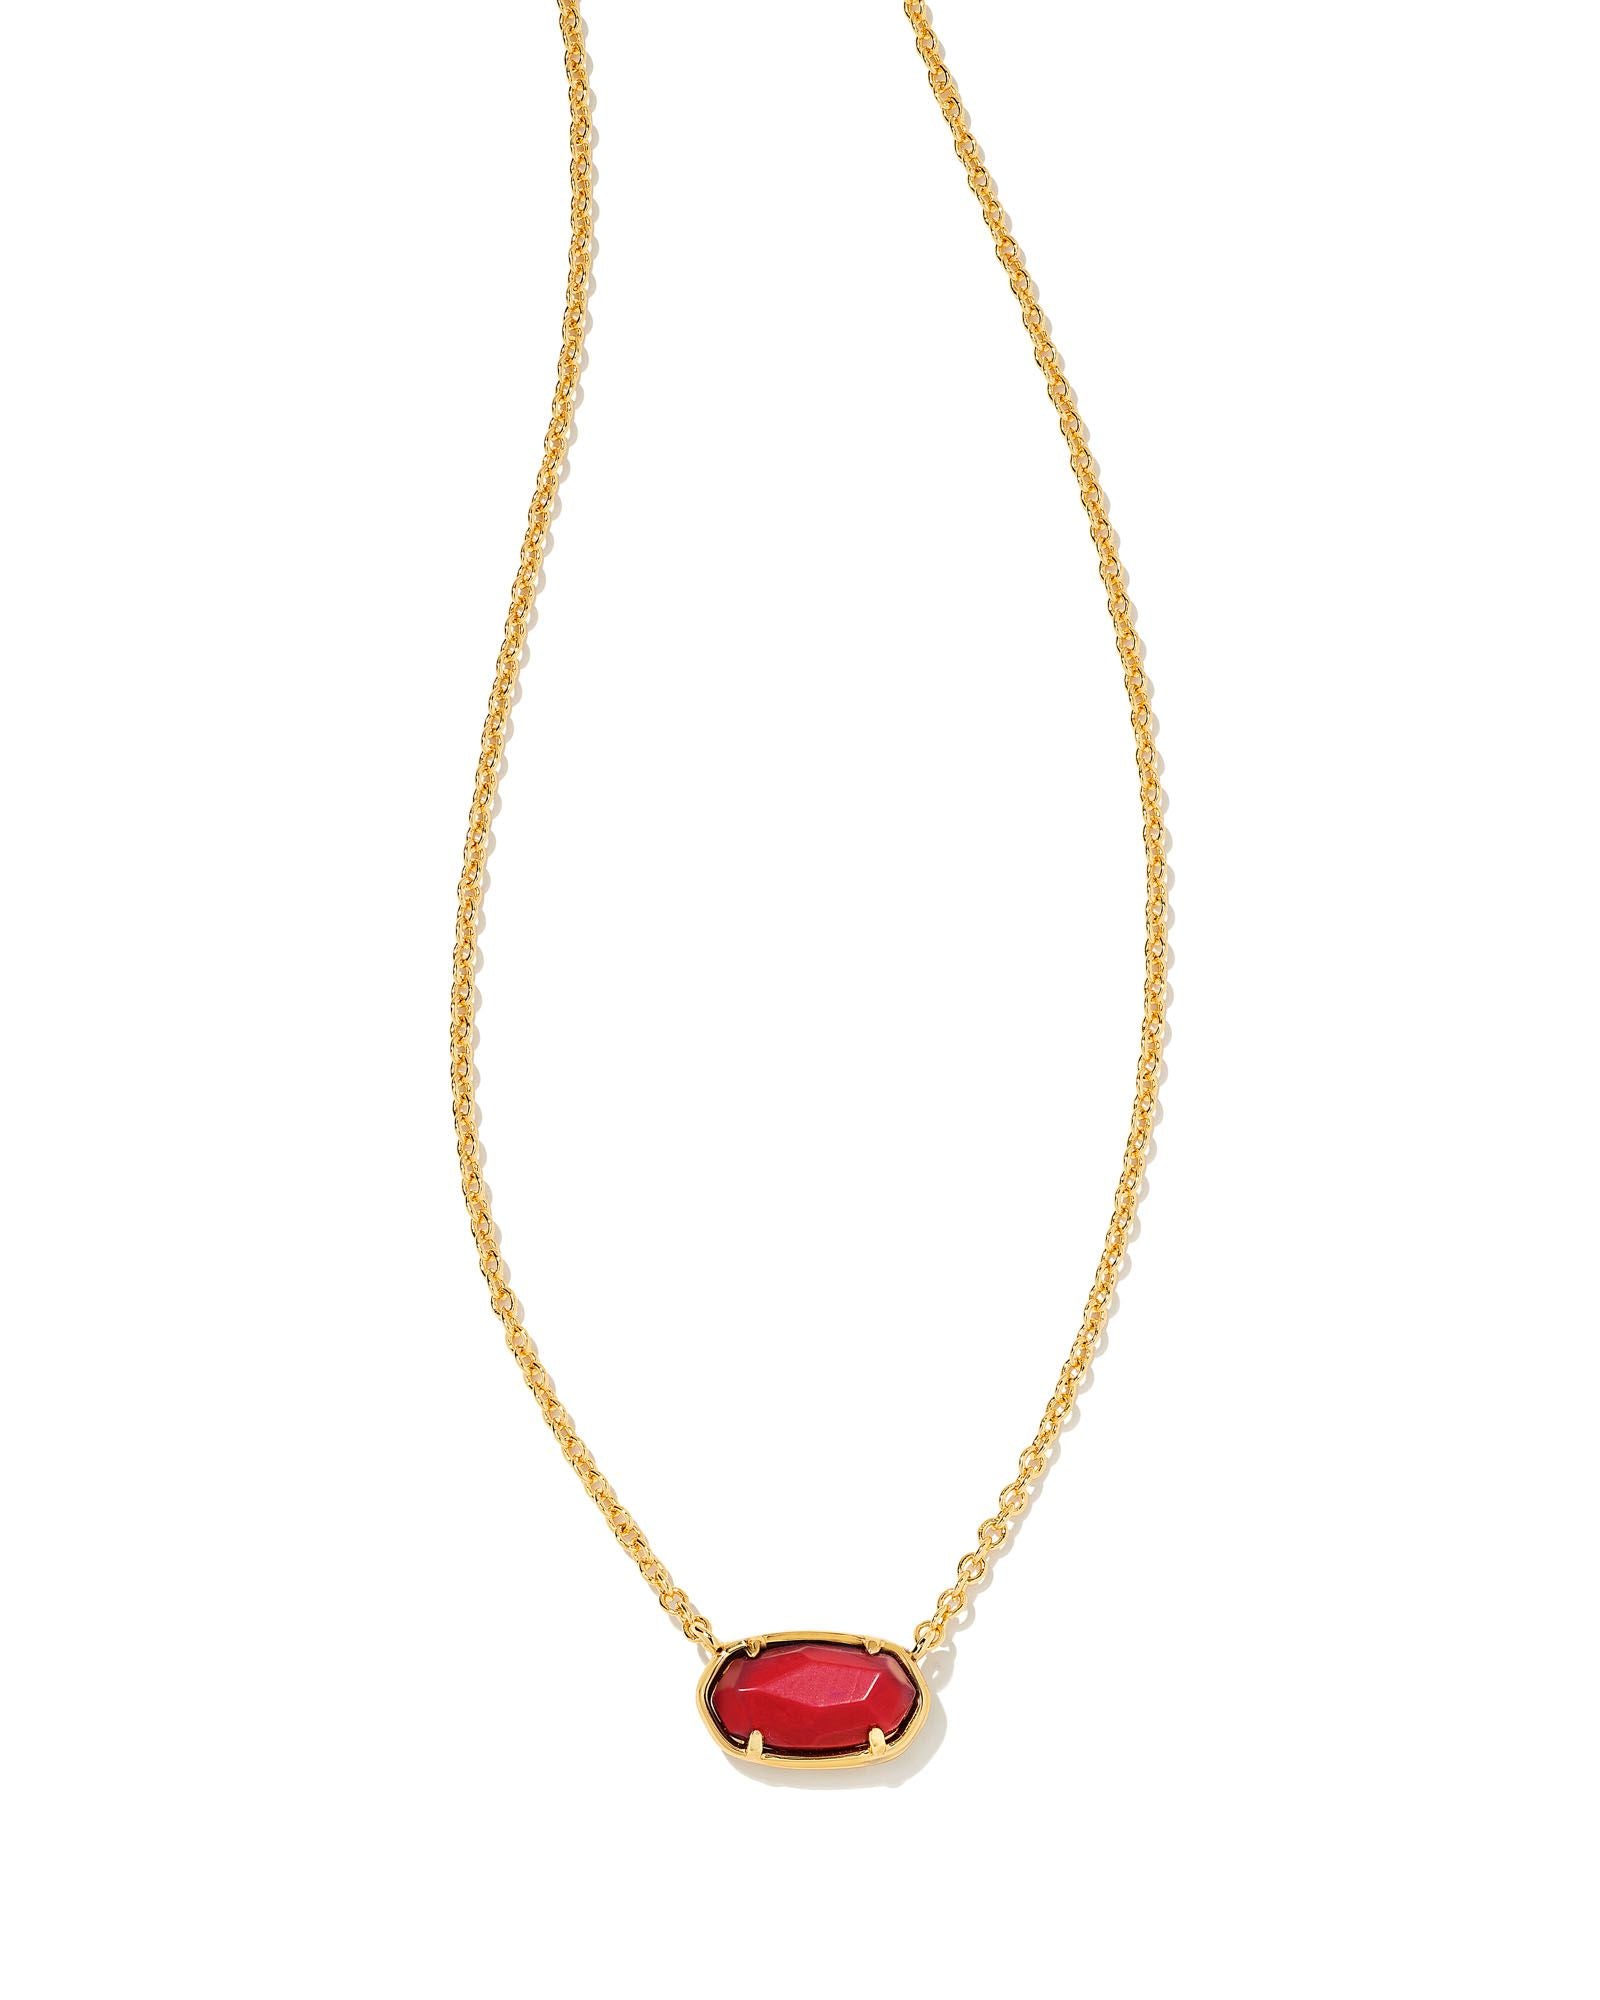 Grayson Short Pendant Necklace Gold Red Illusion